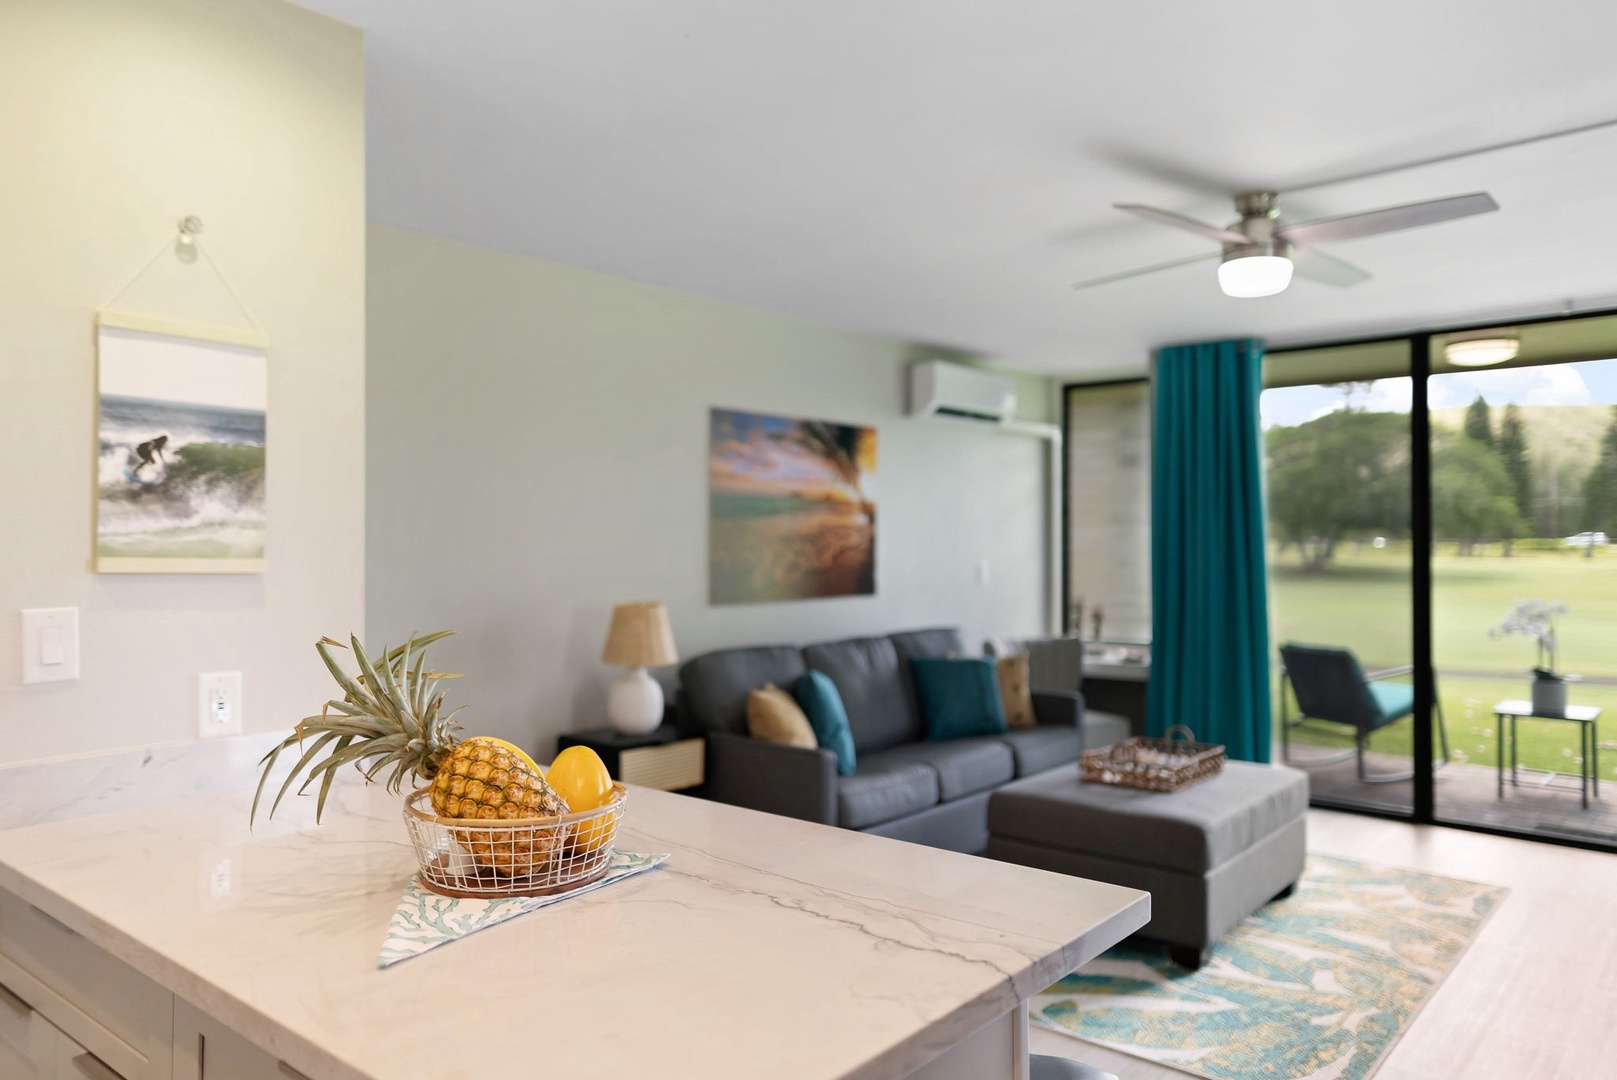 Kahuku Vacation Rentals, Turtle Bay's Kuilima Estates West #104 - Overlooking the living area and private lanai